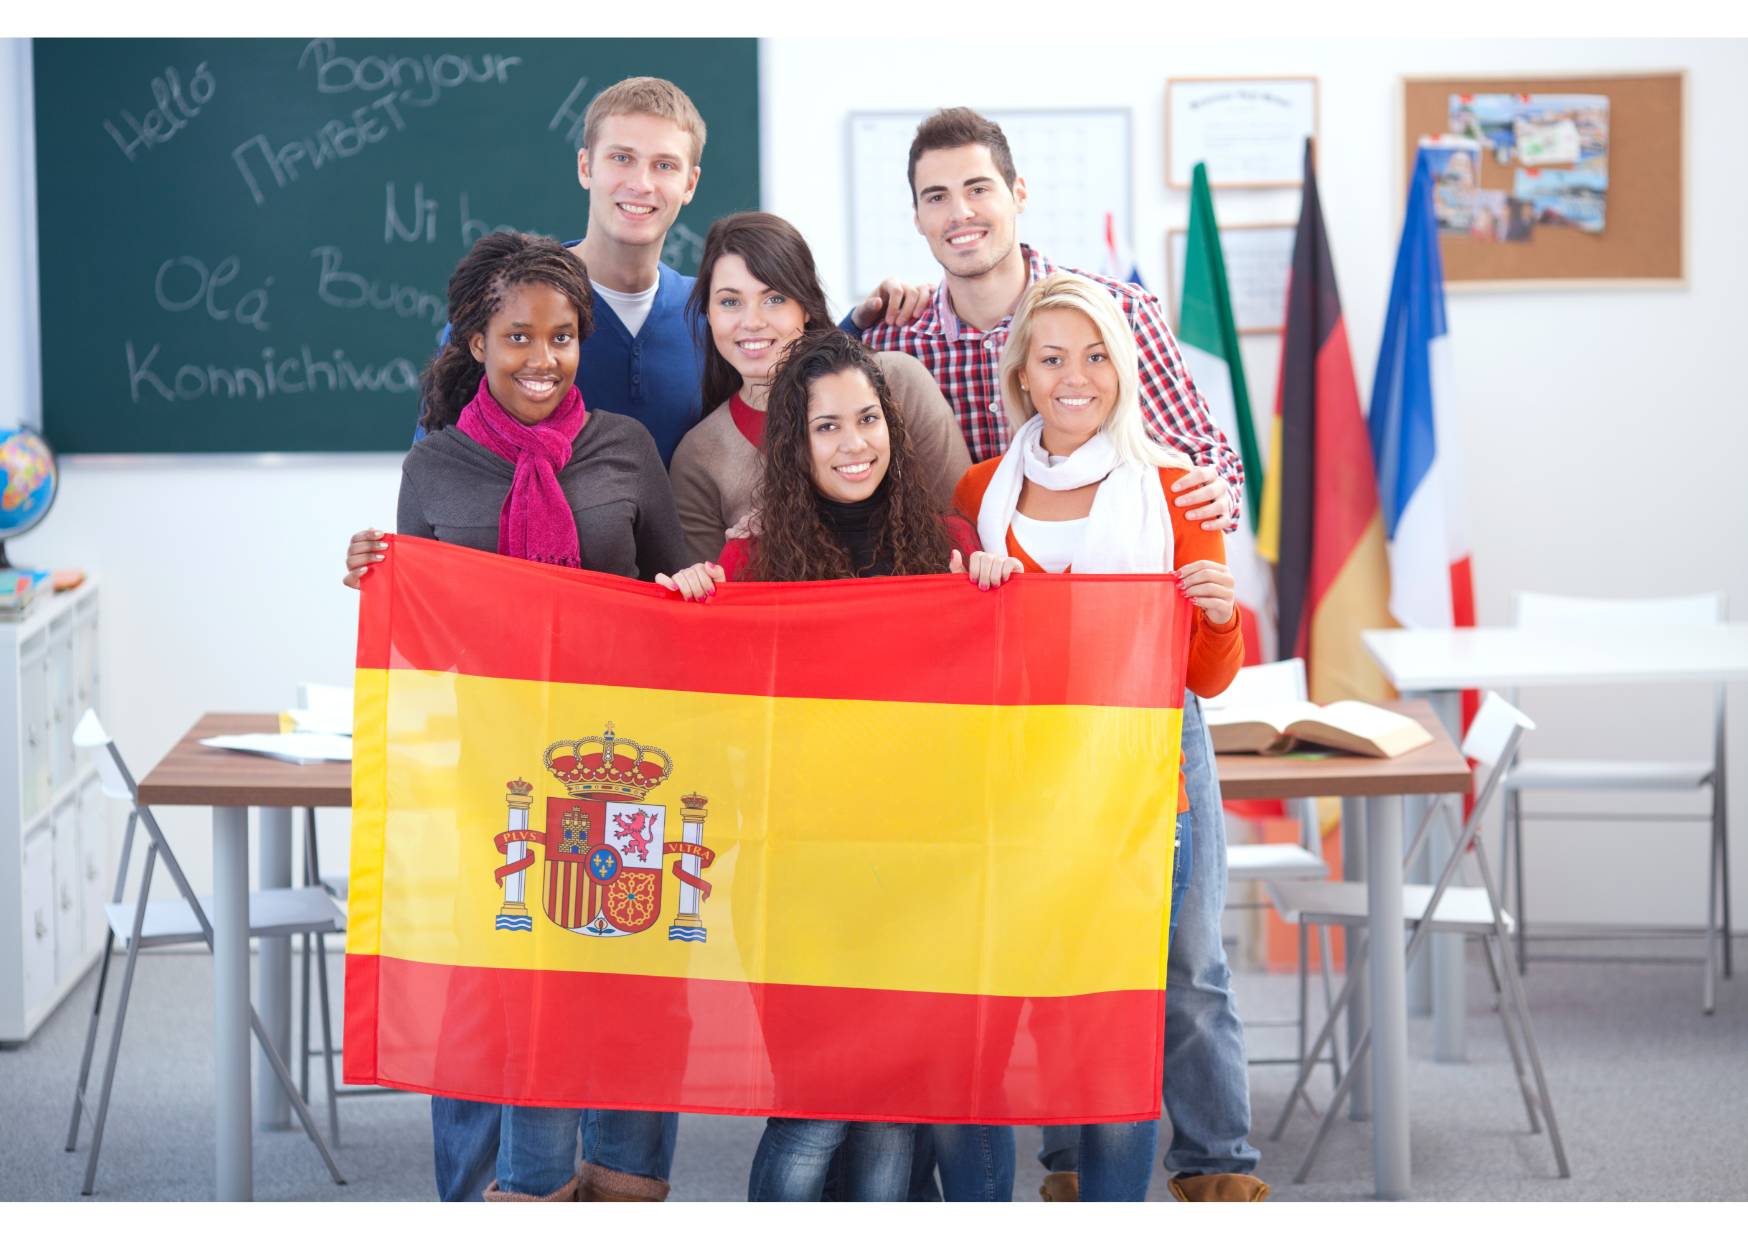 Students at language school with spanish flag